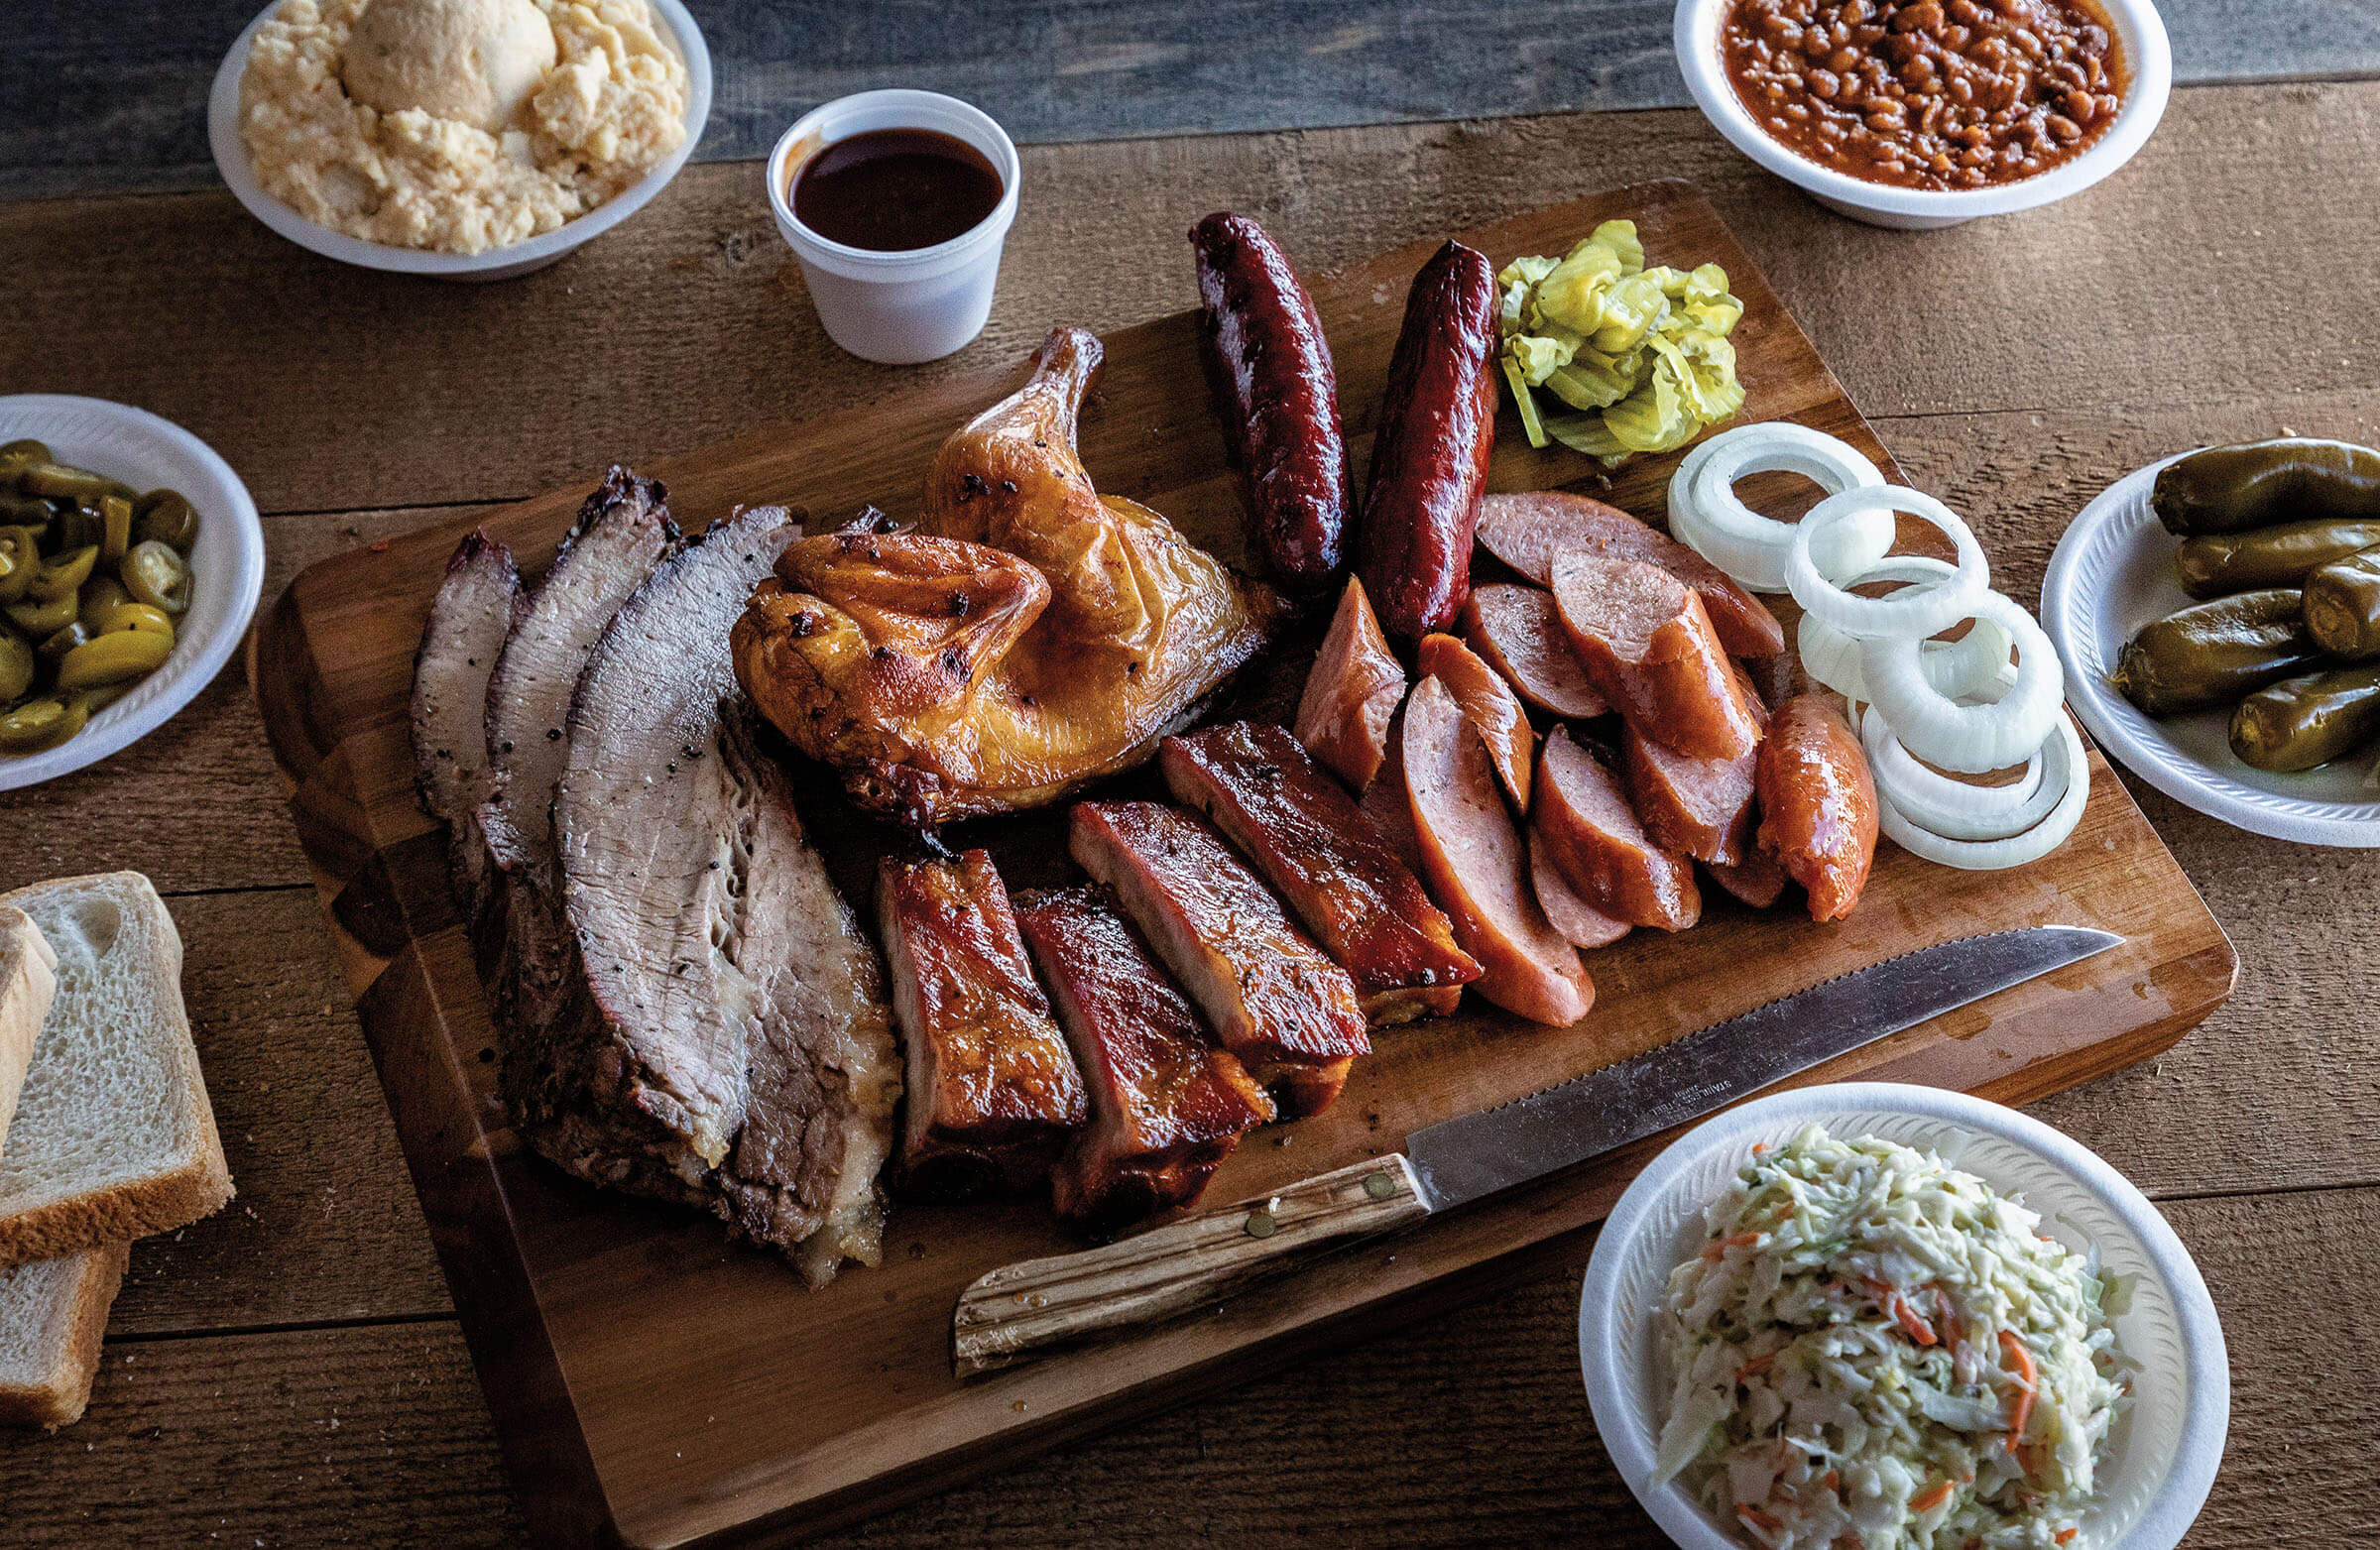 An overhead view of a slection of barbecue, including brisket, chicken, sausage, and sides on a wooden tray